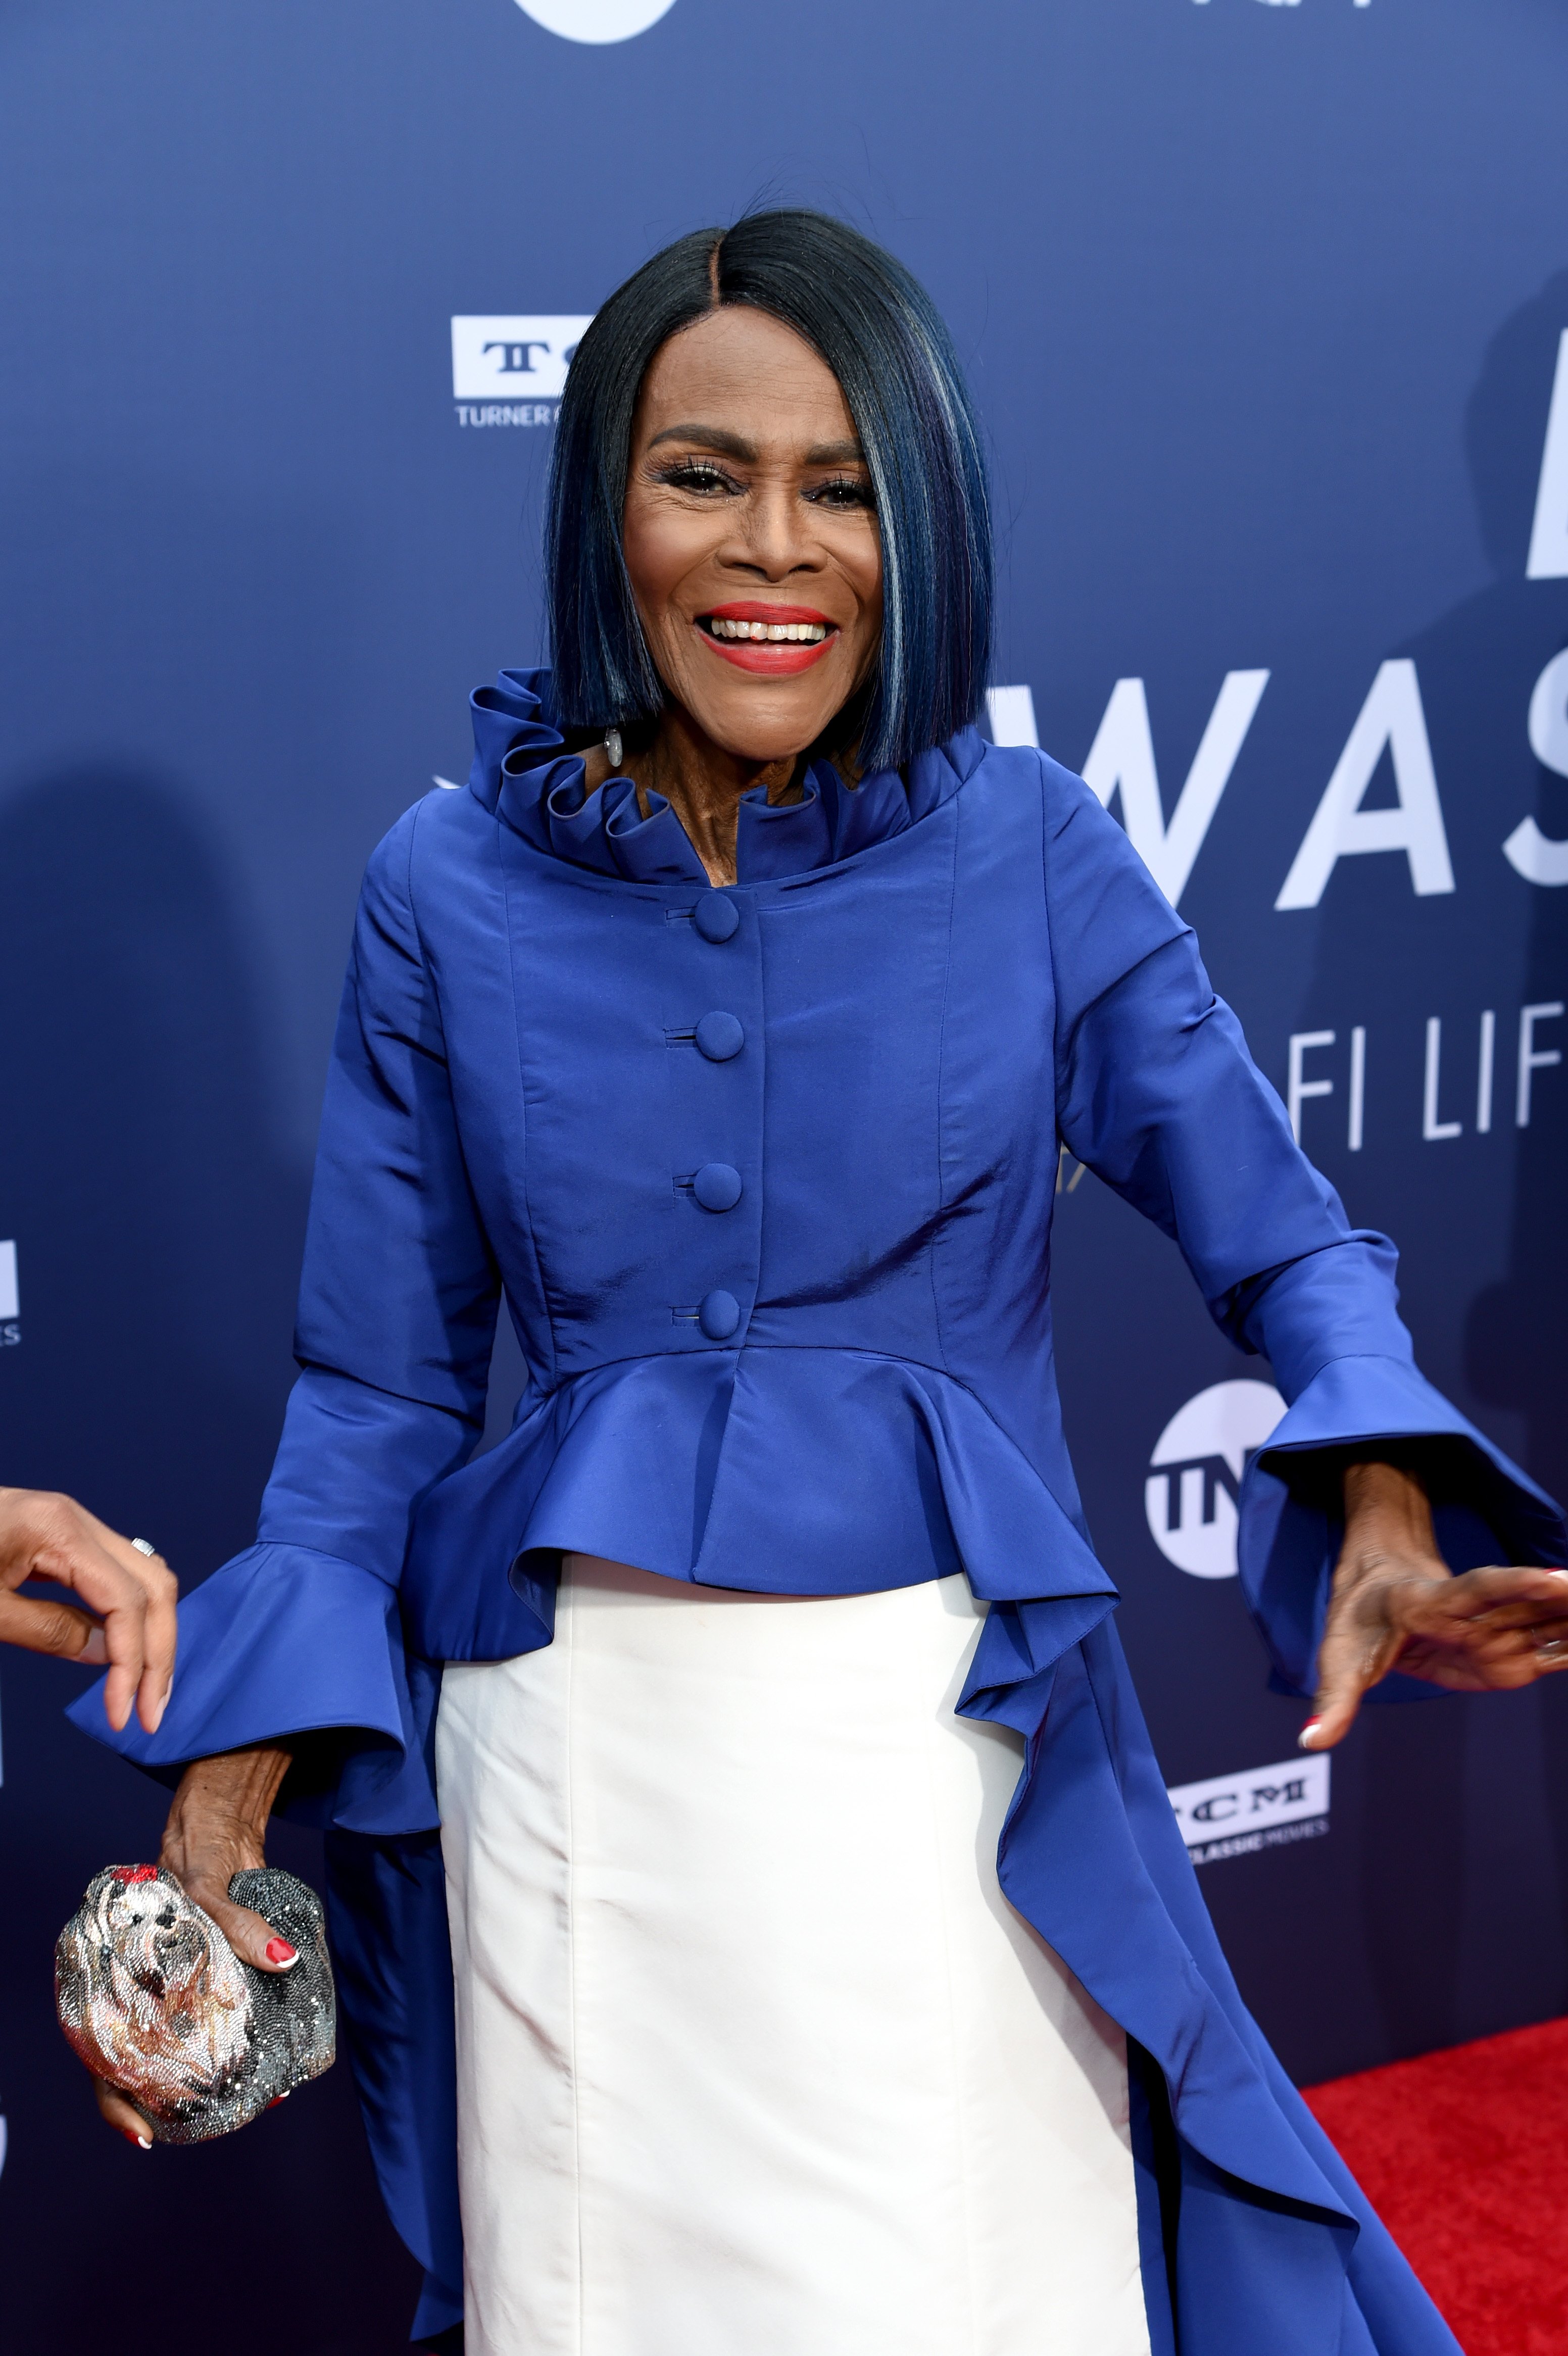 Cicely Tyson at the 47th AFI Life Achievement Awards honoring Denzel Washington at Dolby Theatre on June 06, 2019 in Hollywood, California.|Source: Getty Images